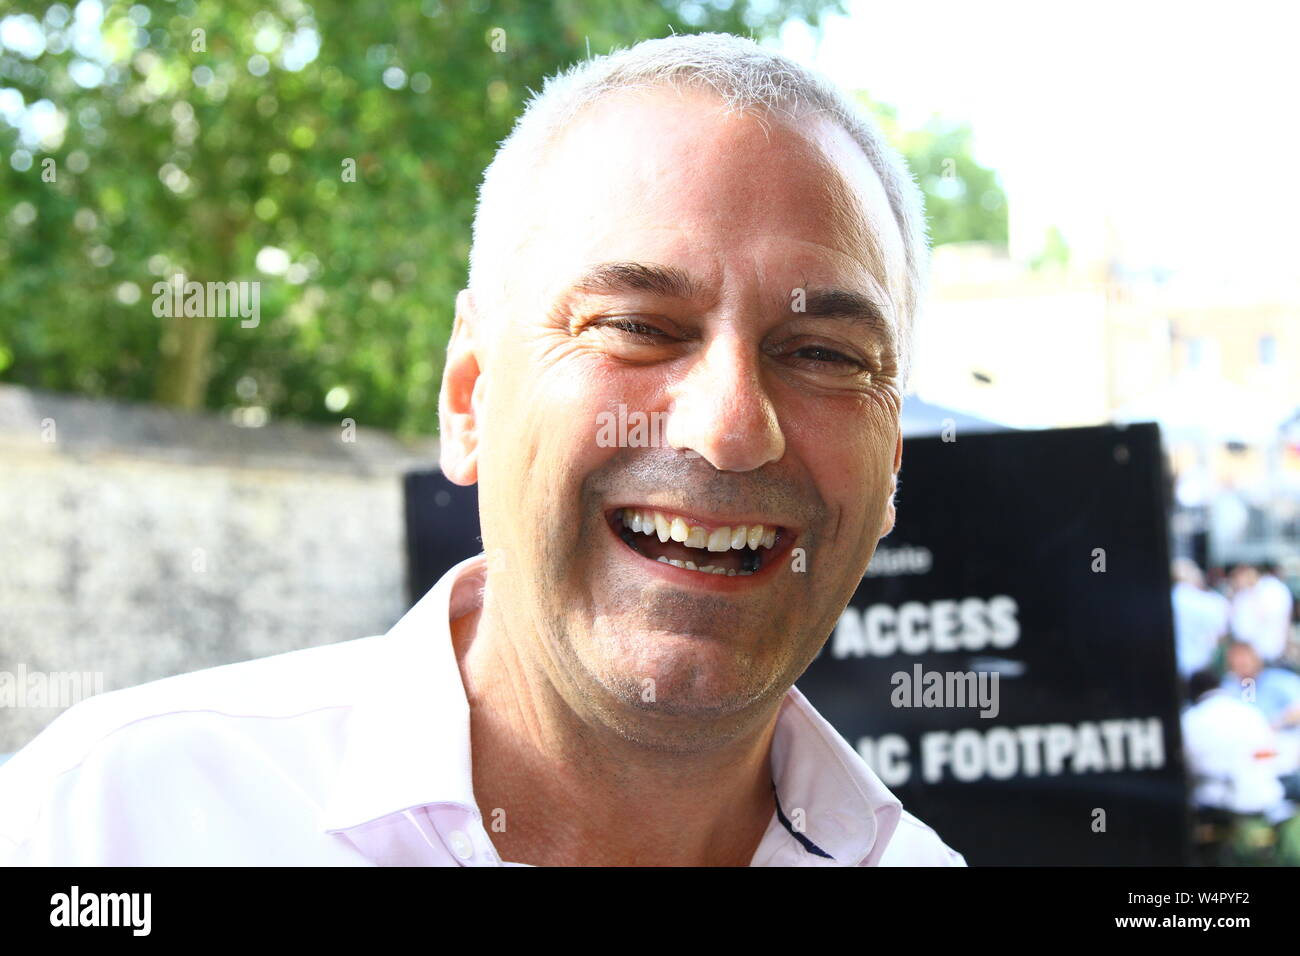 KEVIN MAGUIRE BROADCASTER AND ASSOCIATE EDITOR AT THE DAILY MIRROR NEWSPAPER PICTURED AT COLLEGE GREEN, IN THE CITY OF WESTMINSTER, LONDON,UK ON 24TH JULY 2019. Stock Photo